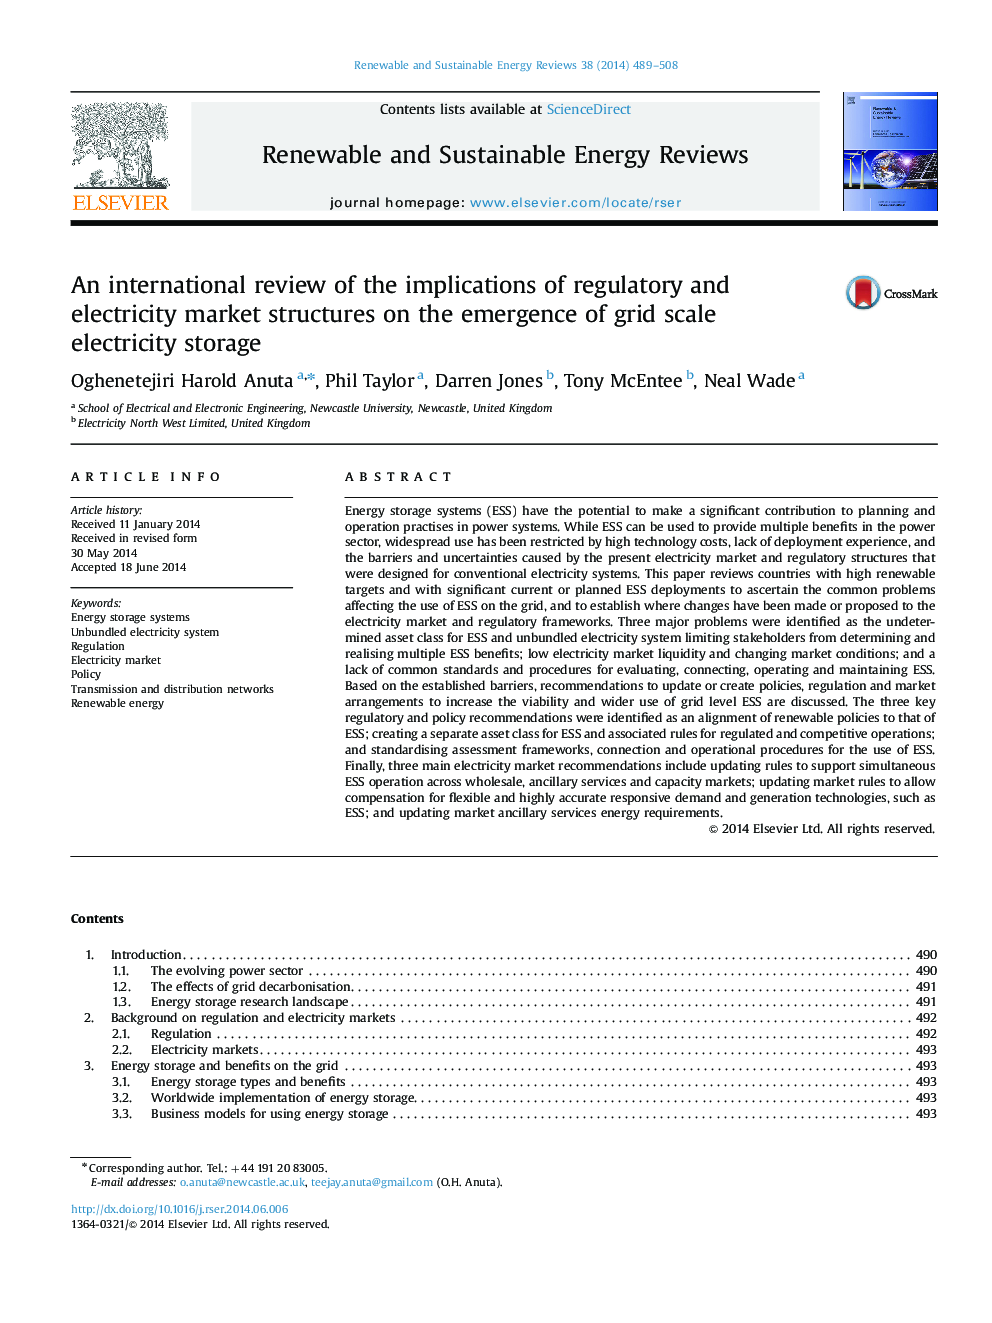 An international review of the implications of regulatory and electricity market structures on the emergence of grid scale electricity storage